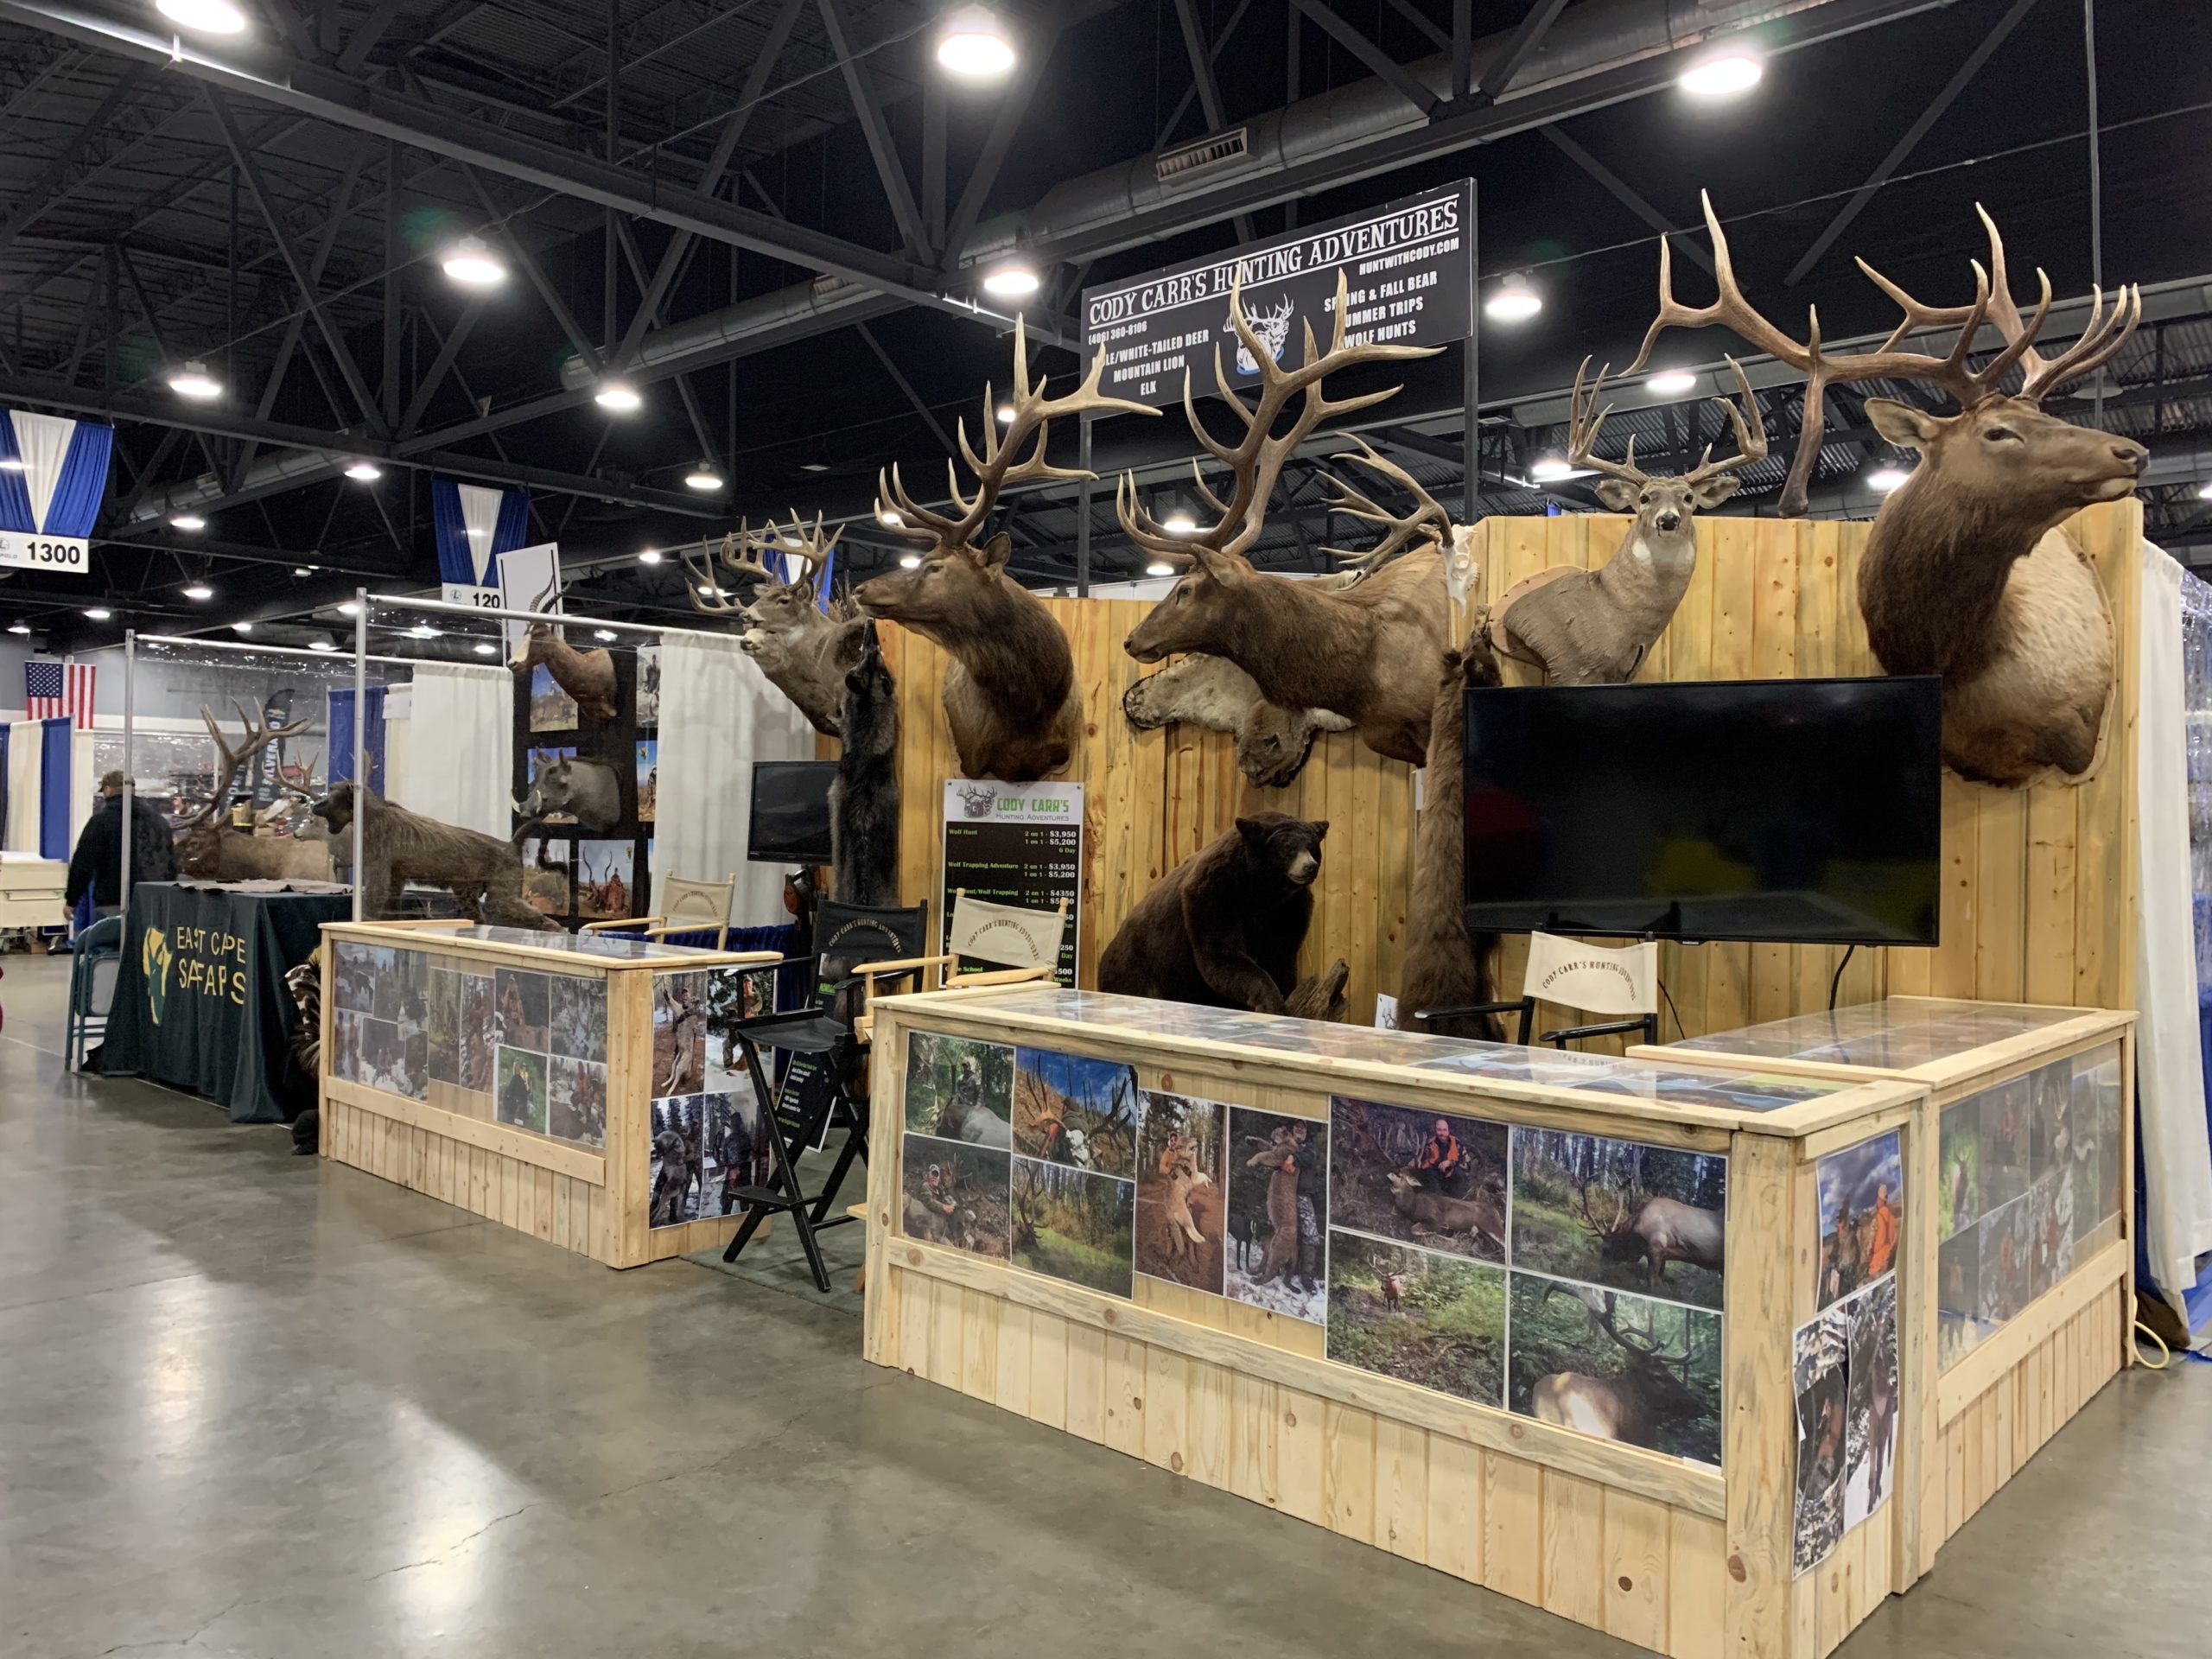 The Portland Expo Center Back the Pacific Northwest Sportsmen